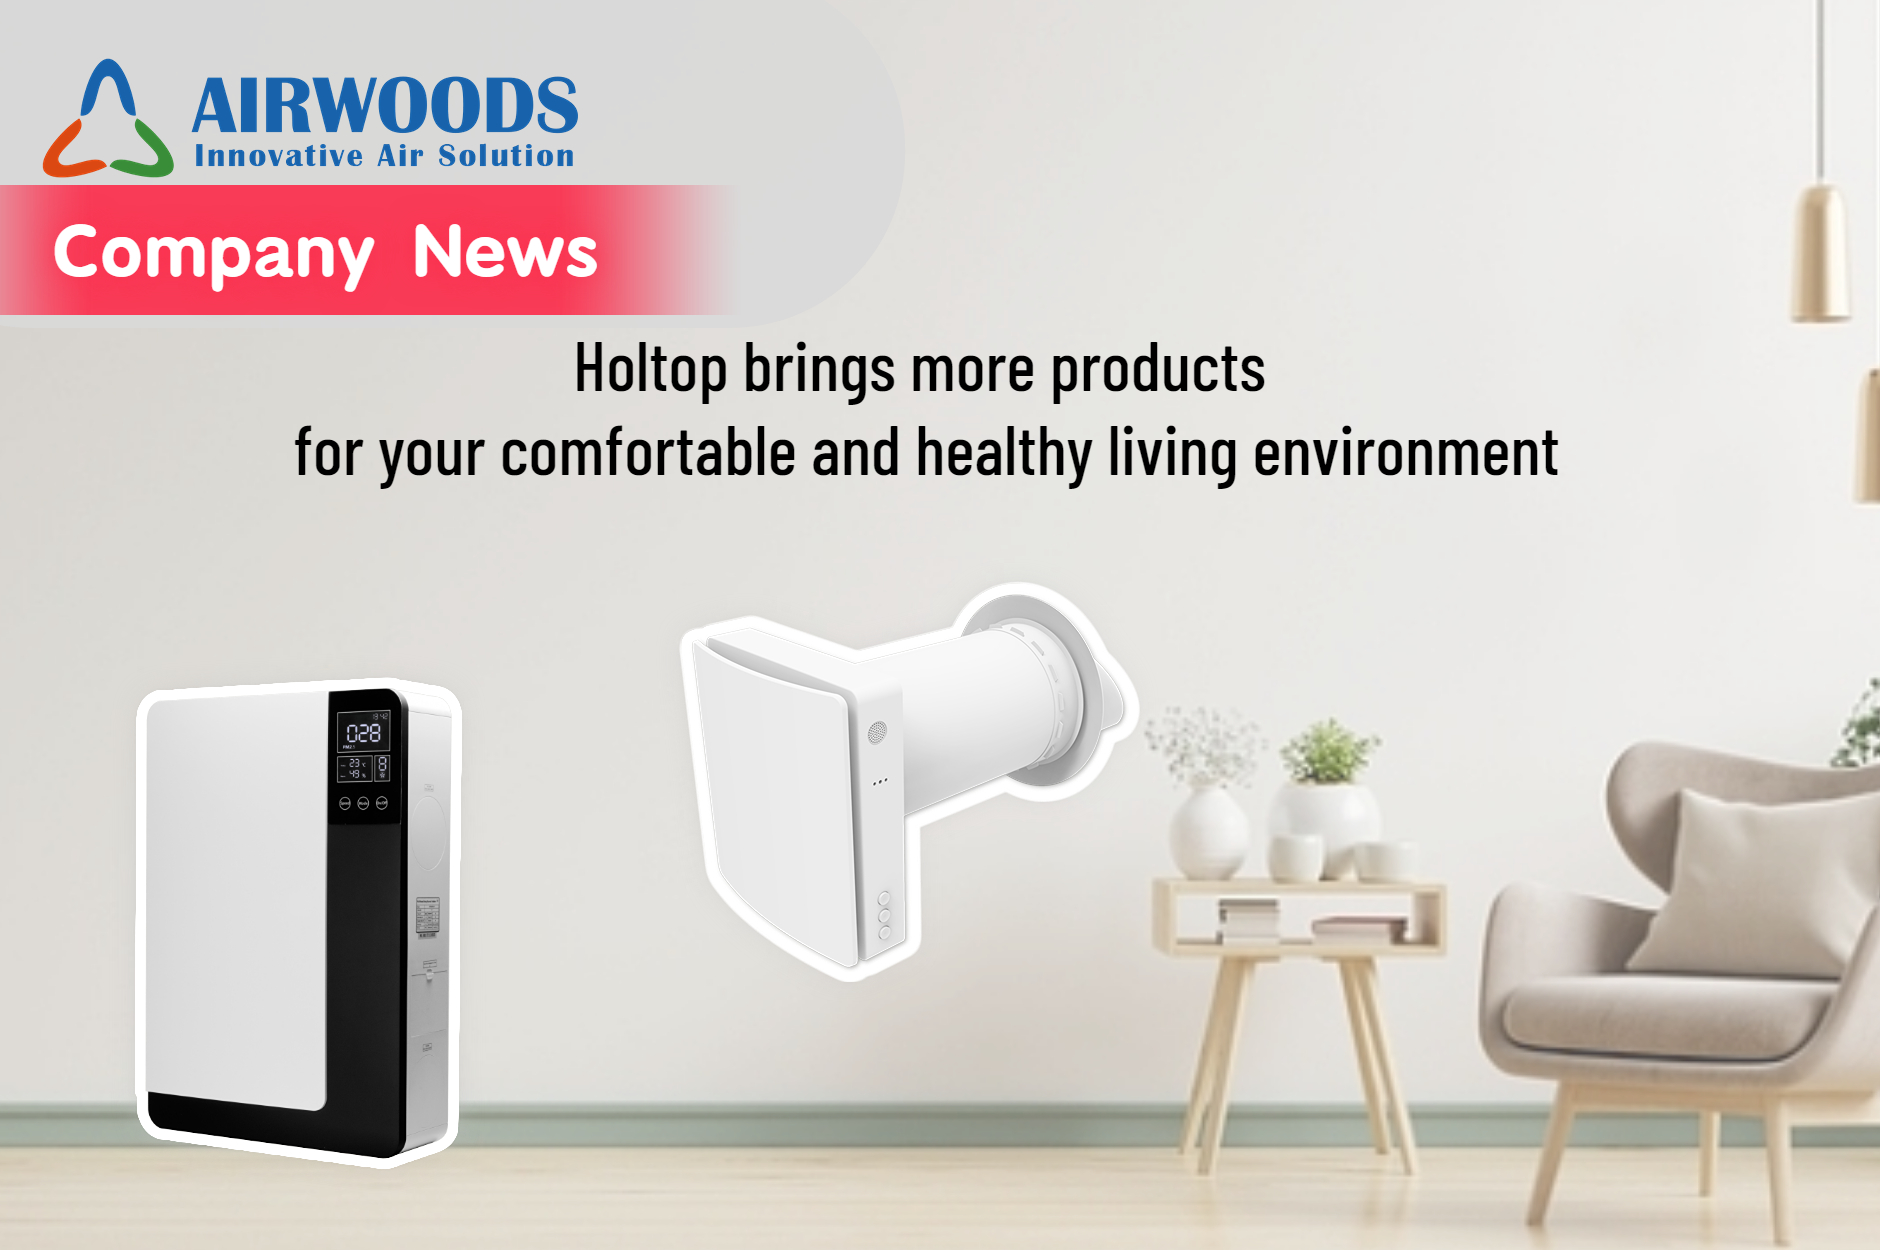 Holtop brings more products for your comfortable and healthy living environment